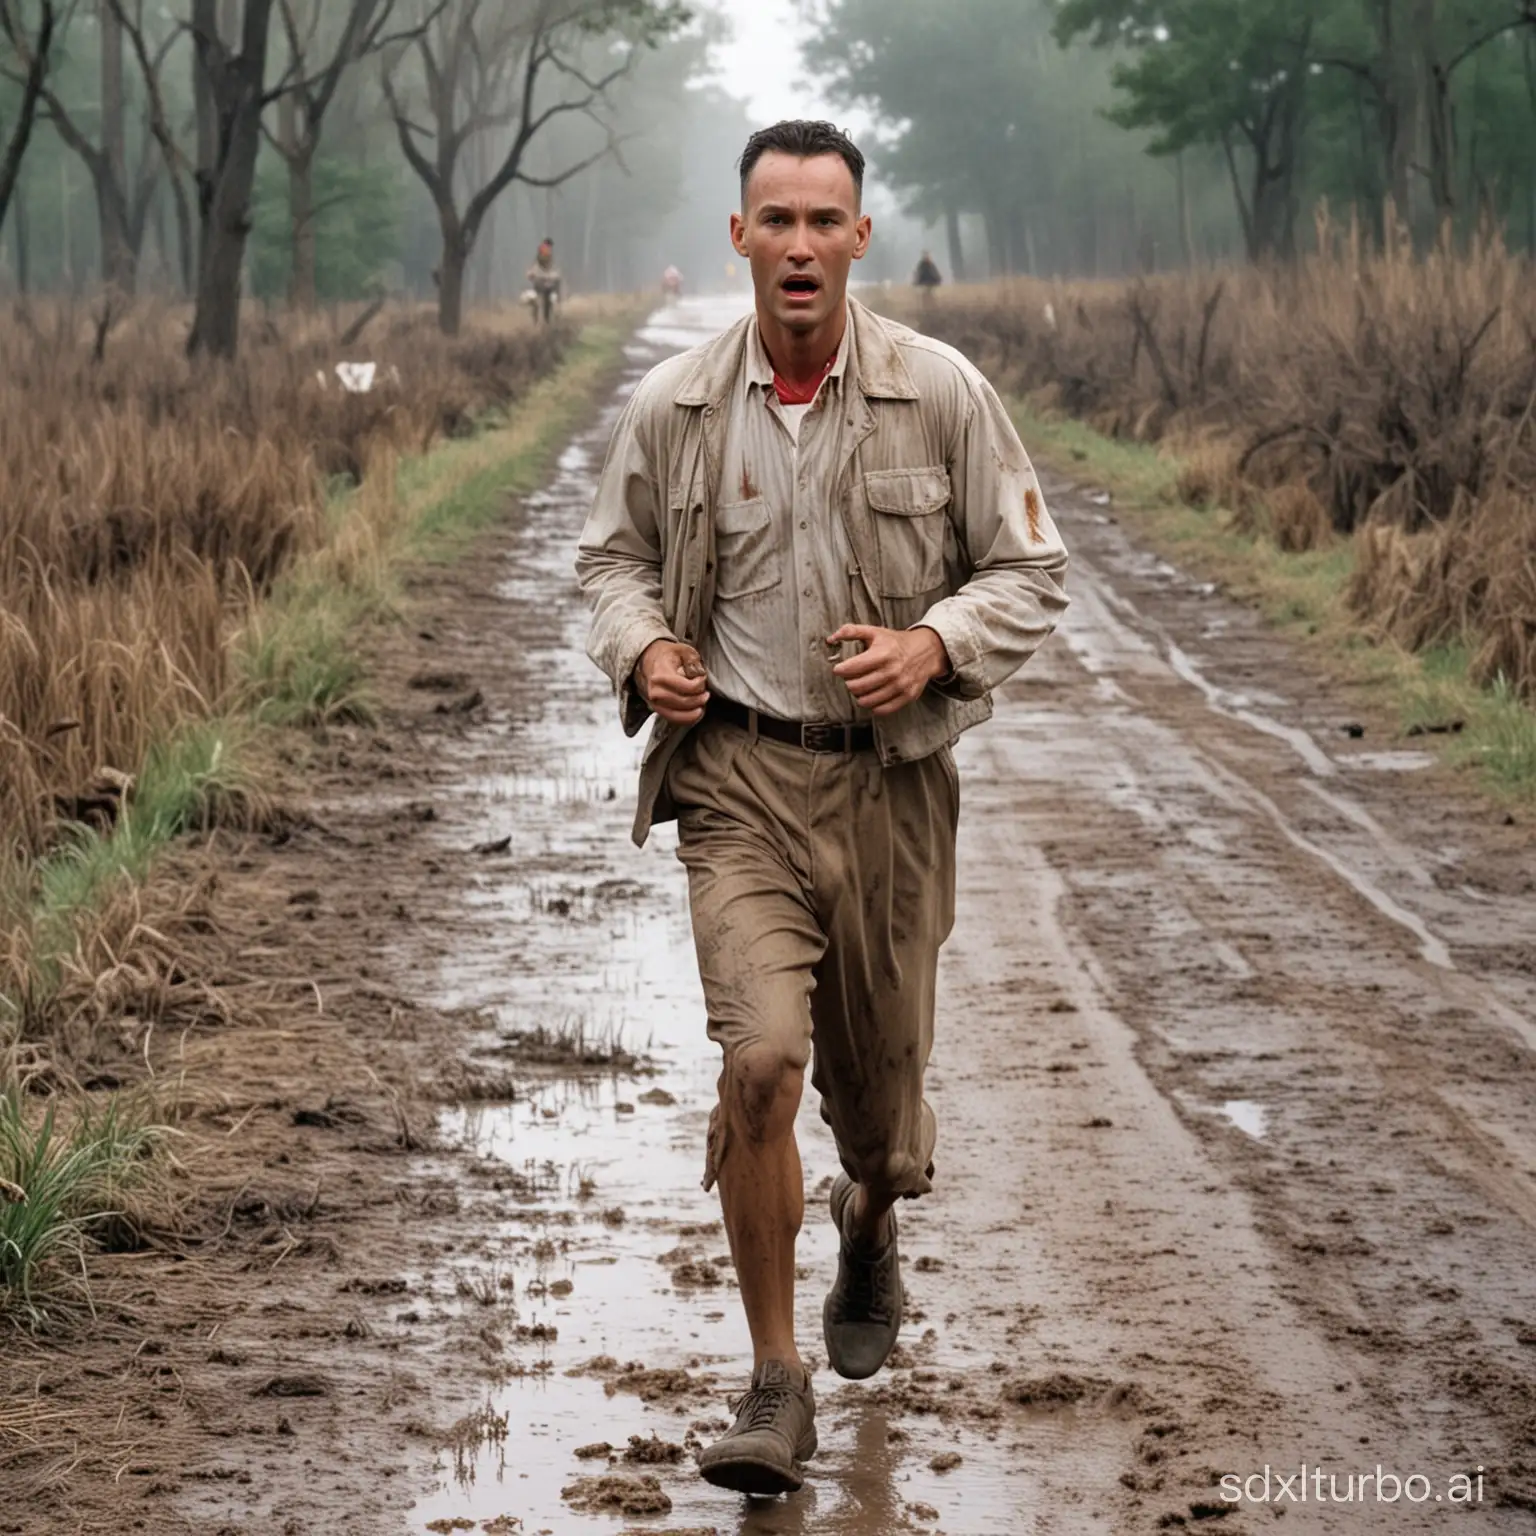 Forrest Gump is running on a muddy road.